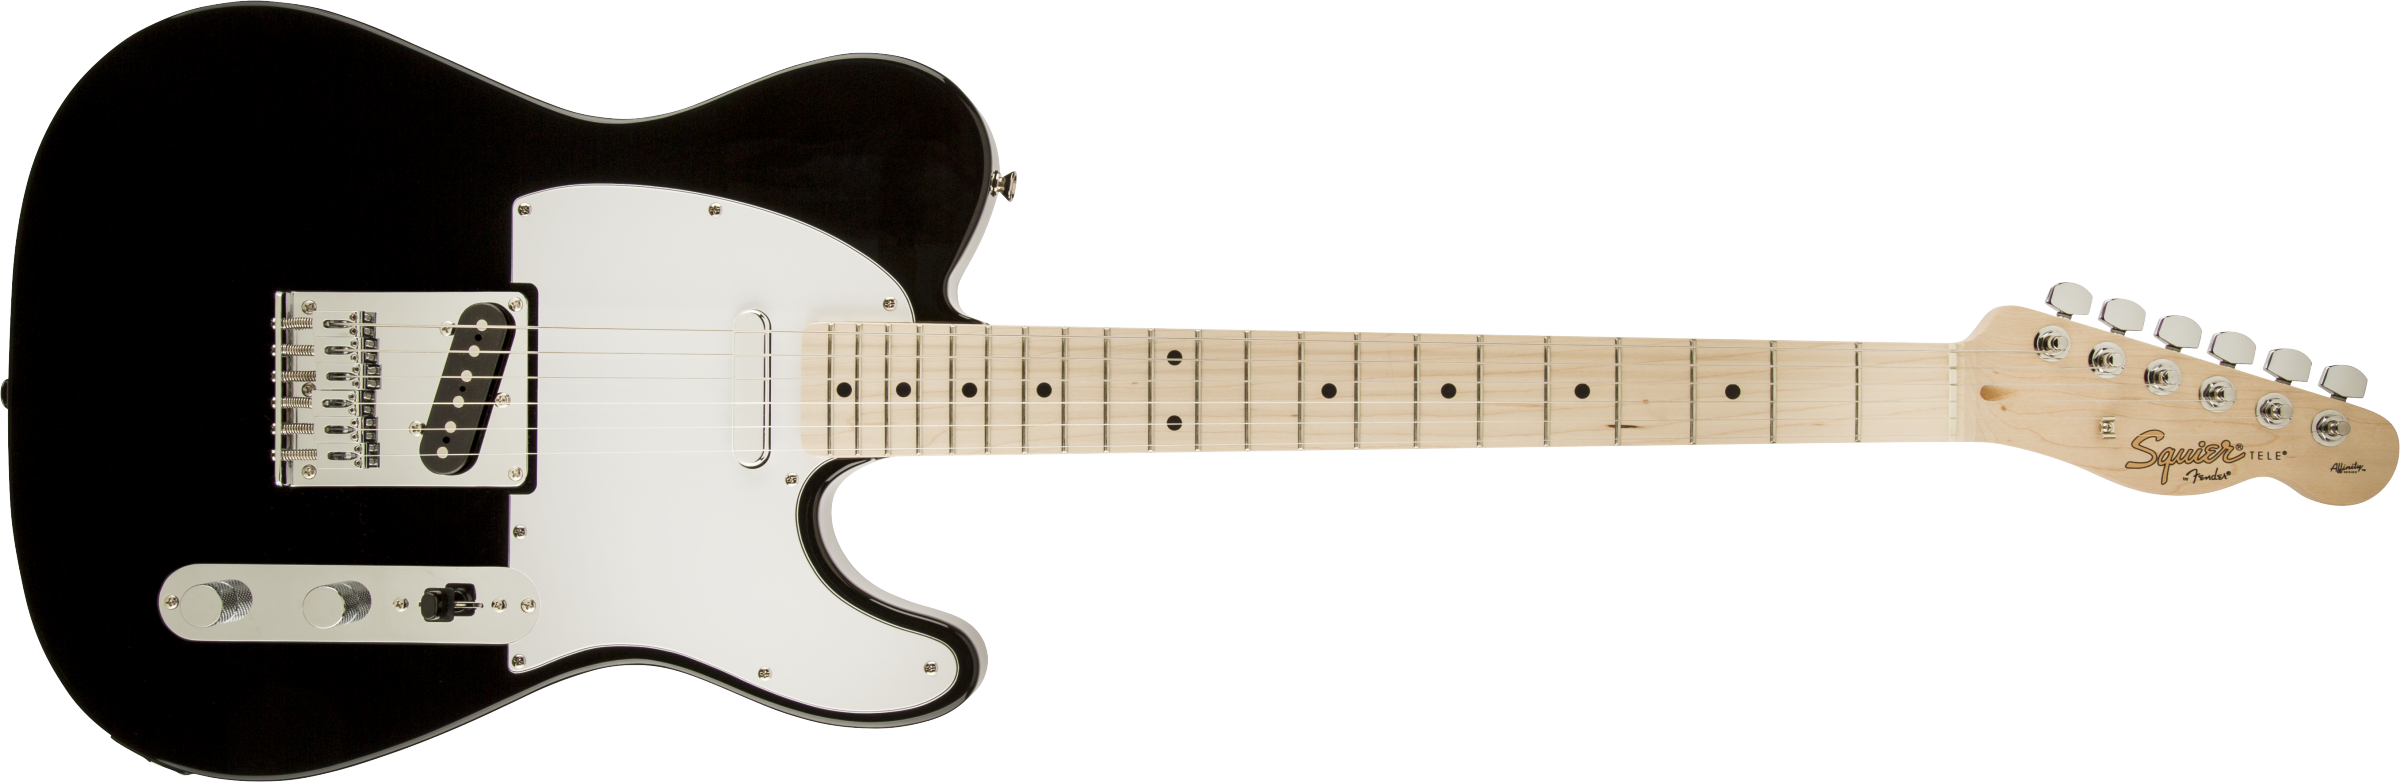 Squier® Affinity Series™ Telecaster®, Maple Fingerboard, Black